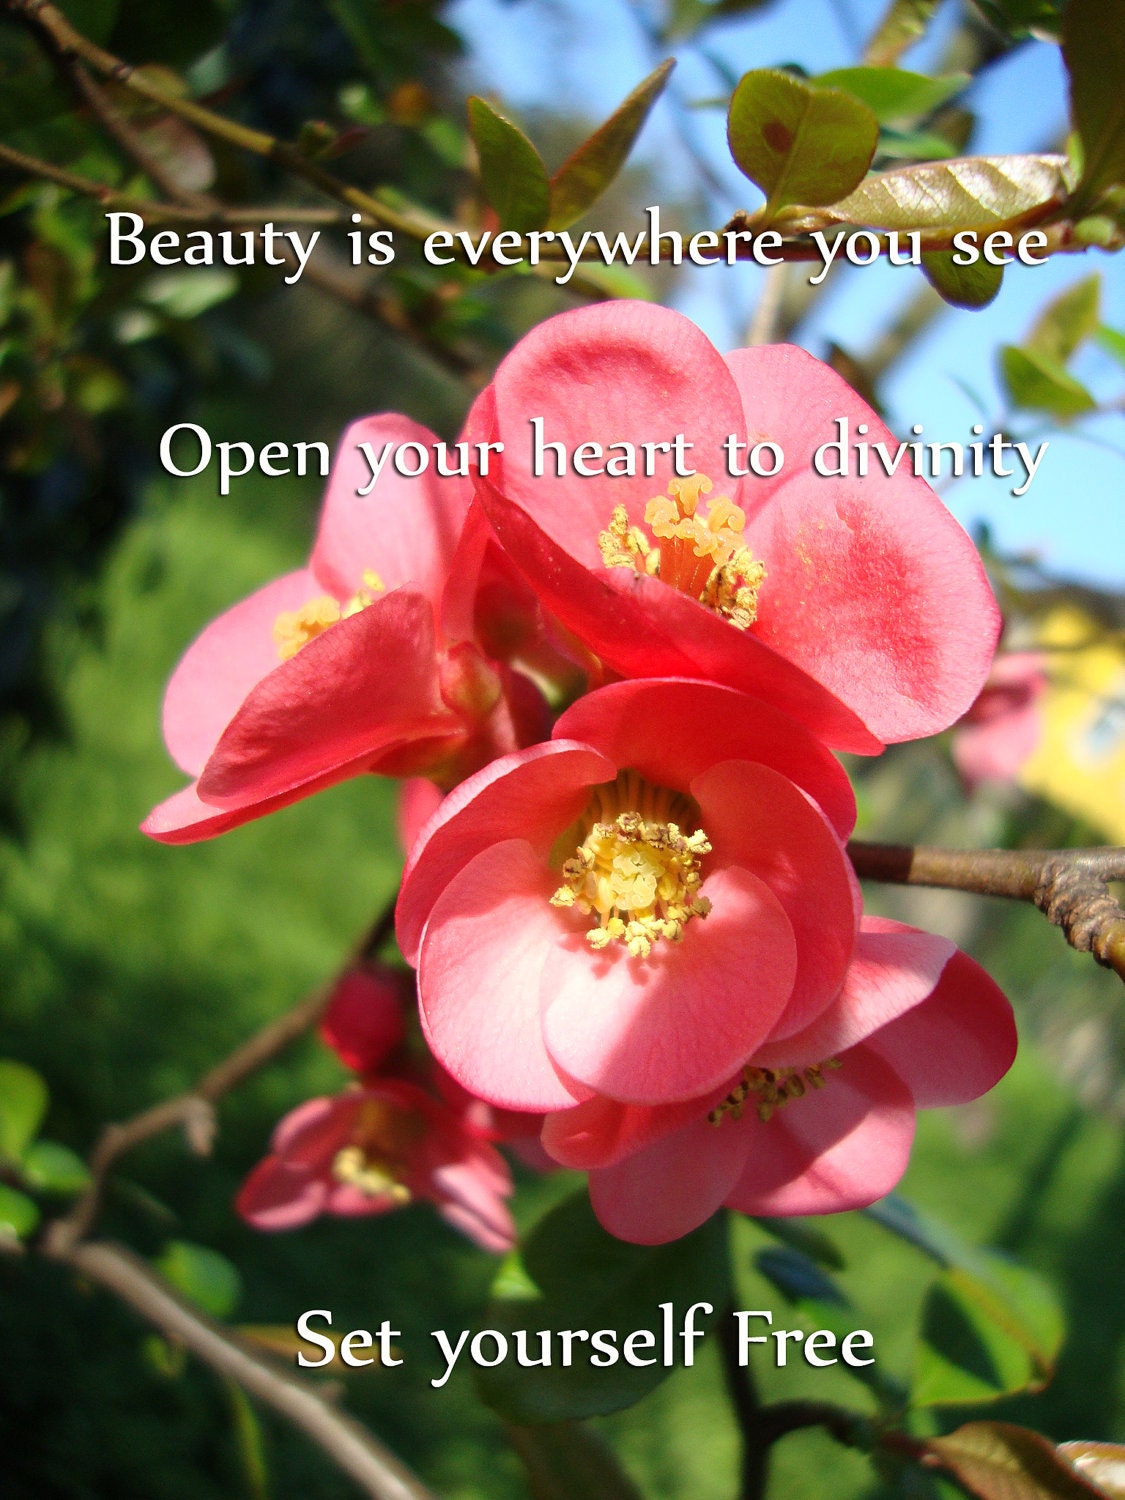 Nature Photo Inspirational Quote -  8x10 Fine Art Photography, Beauty is everywhere you see